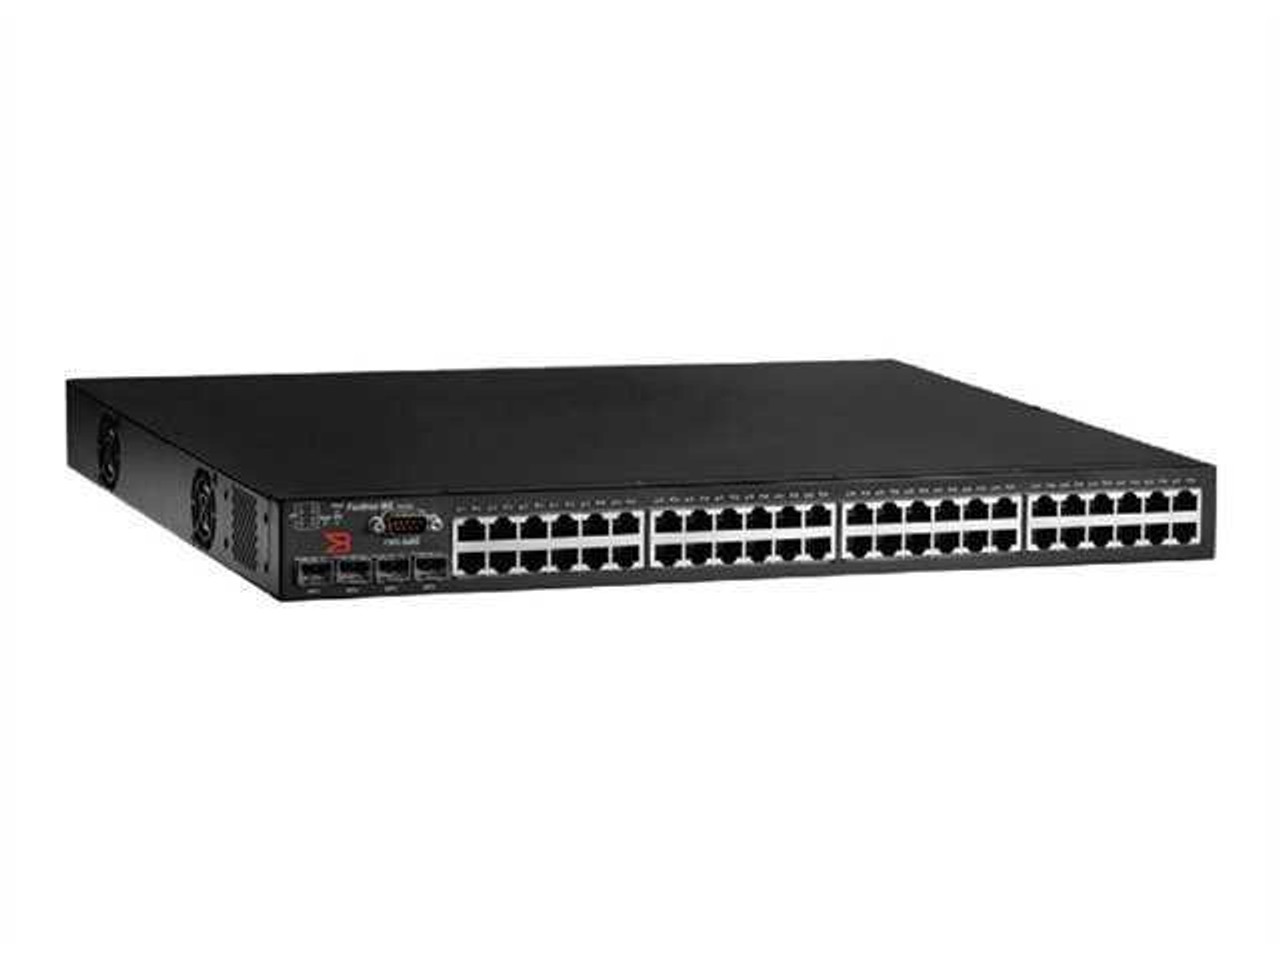 FWS648-POE Brocade FastIron FWS648-POE Stackable Layer 3 Workgroup Switch 4 x SFP (mini-GBIC) Shared 48 x 10/100Base-TX LAN (Refurbished)